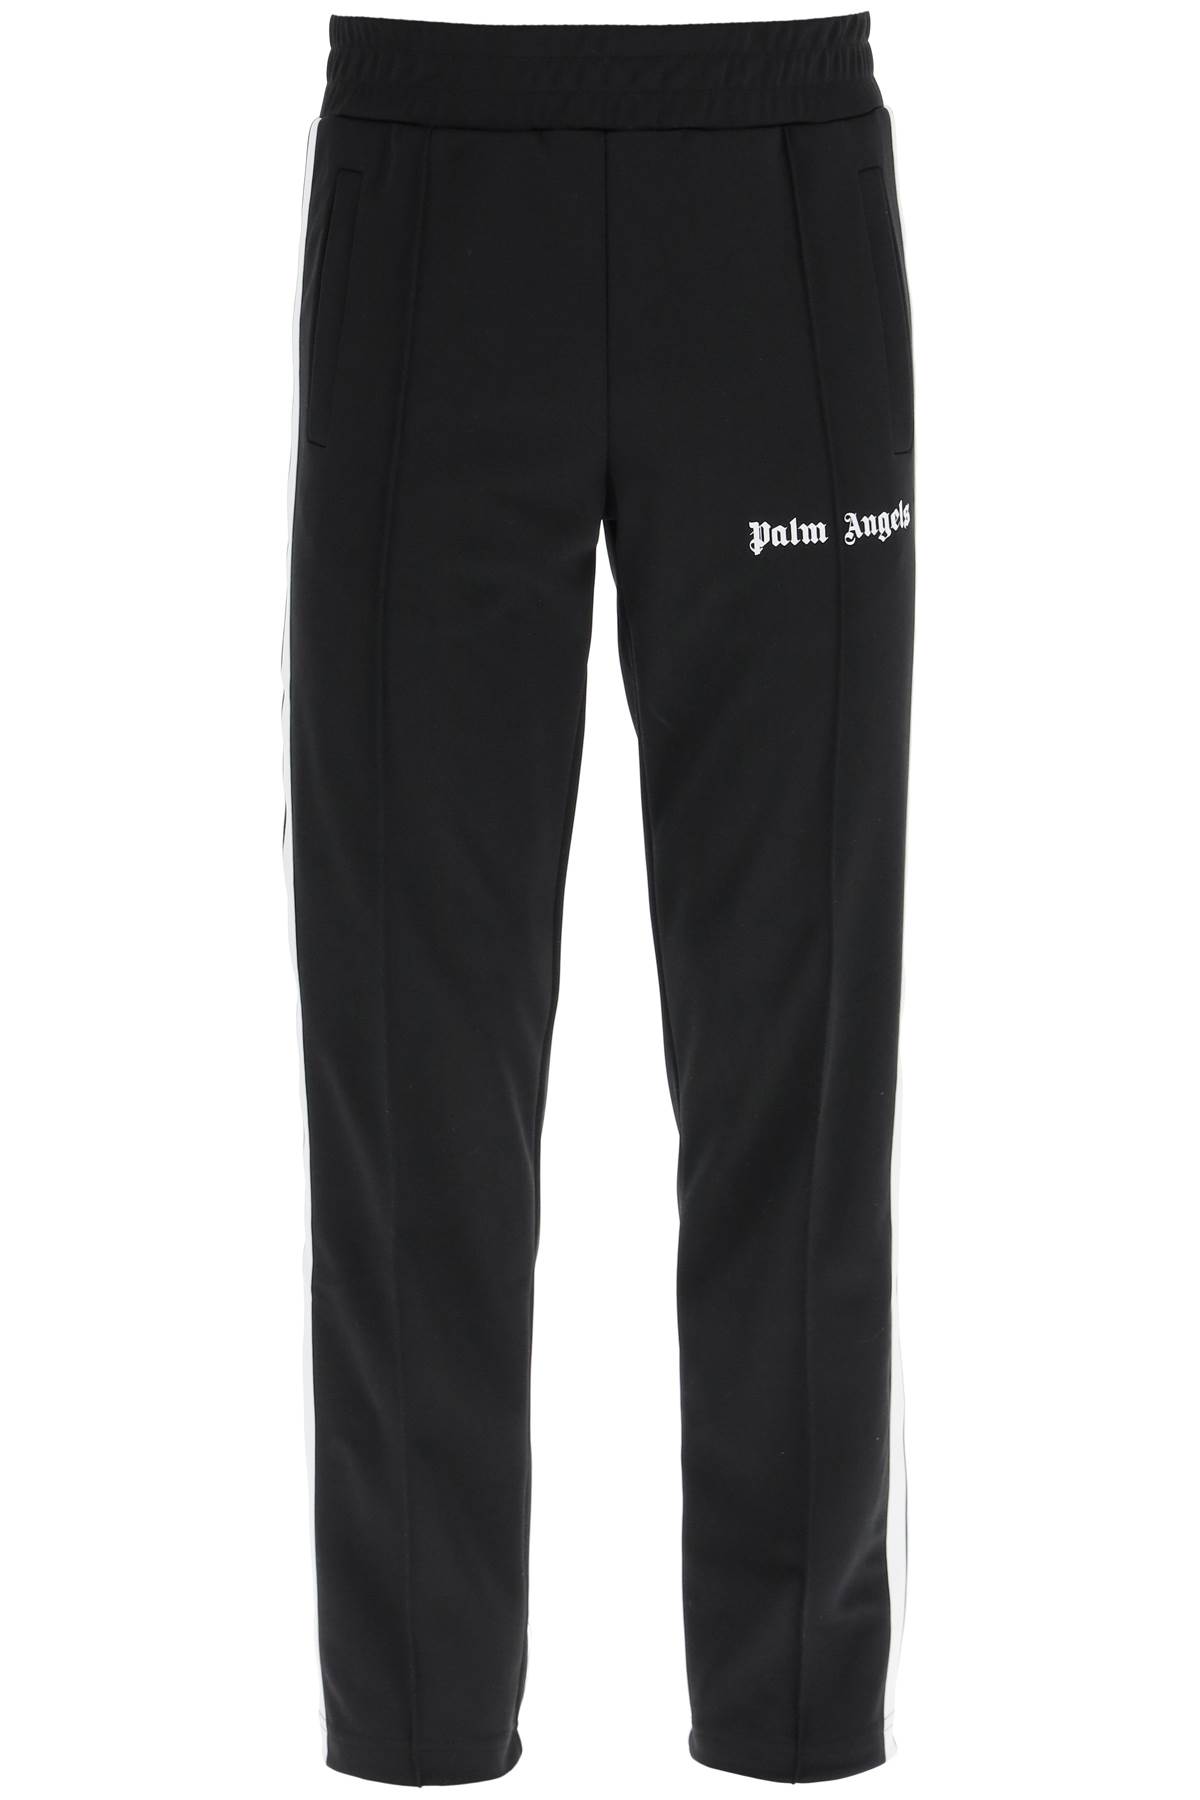 Palm Angels Straight Trackpants